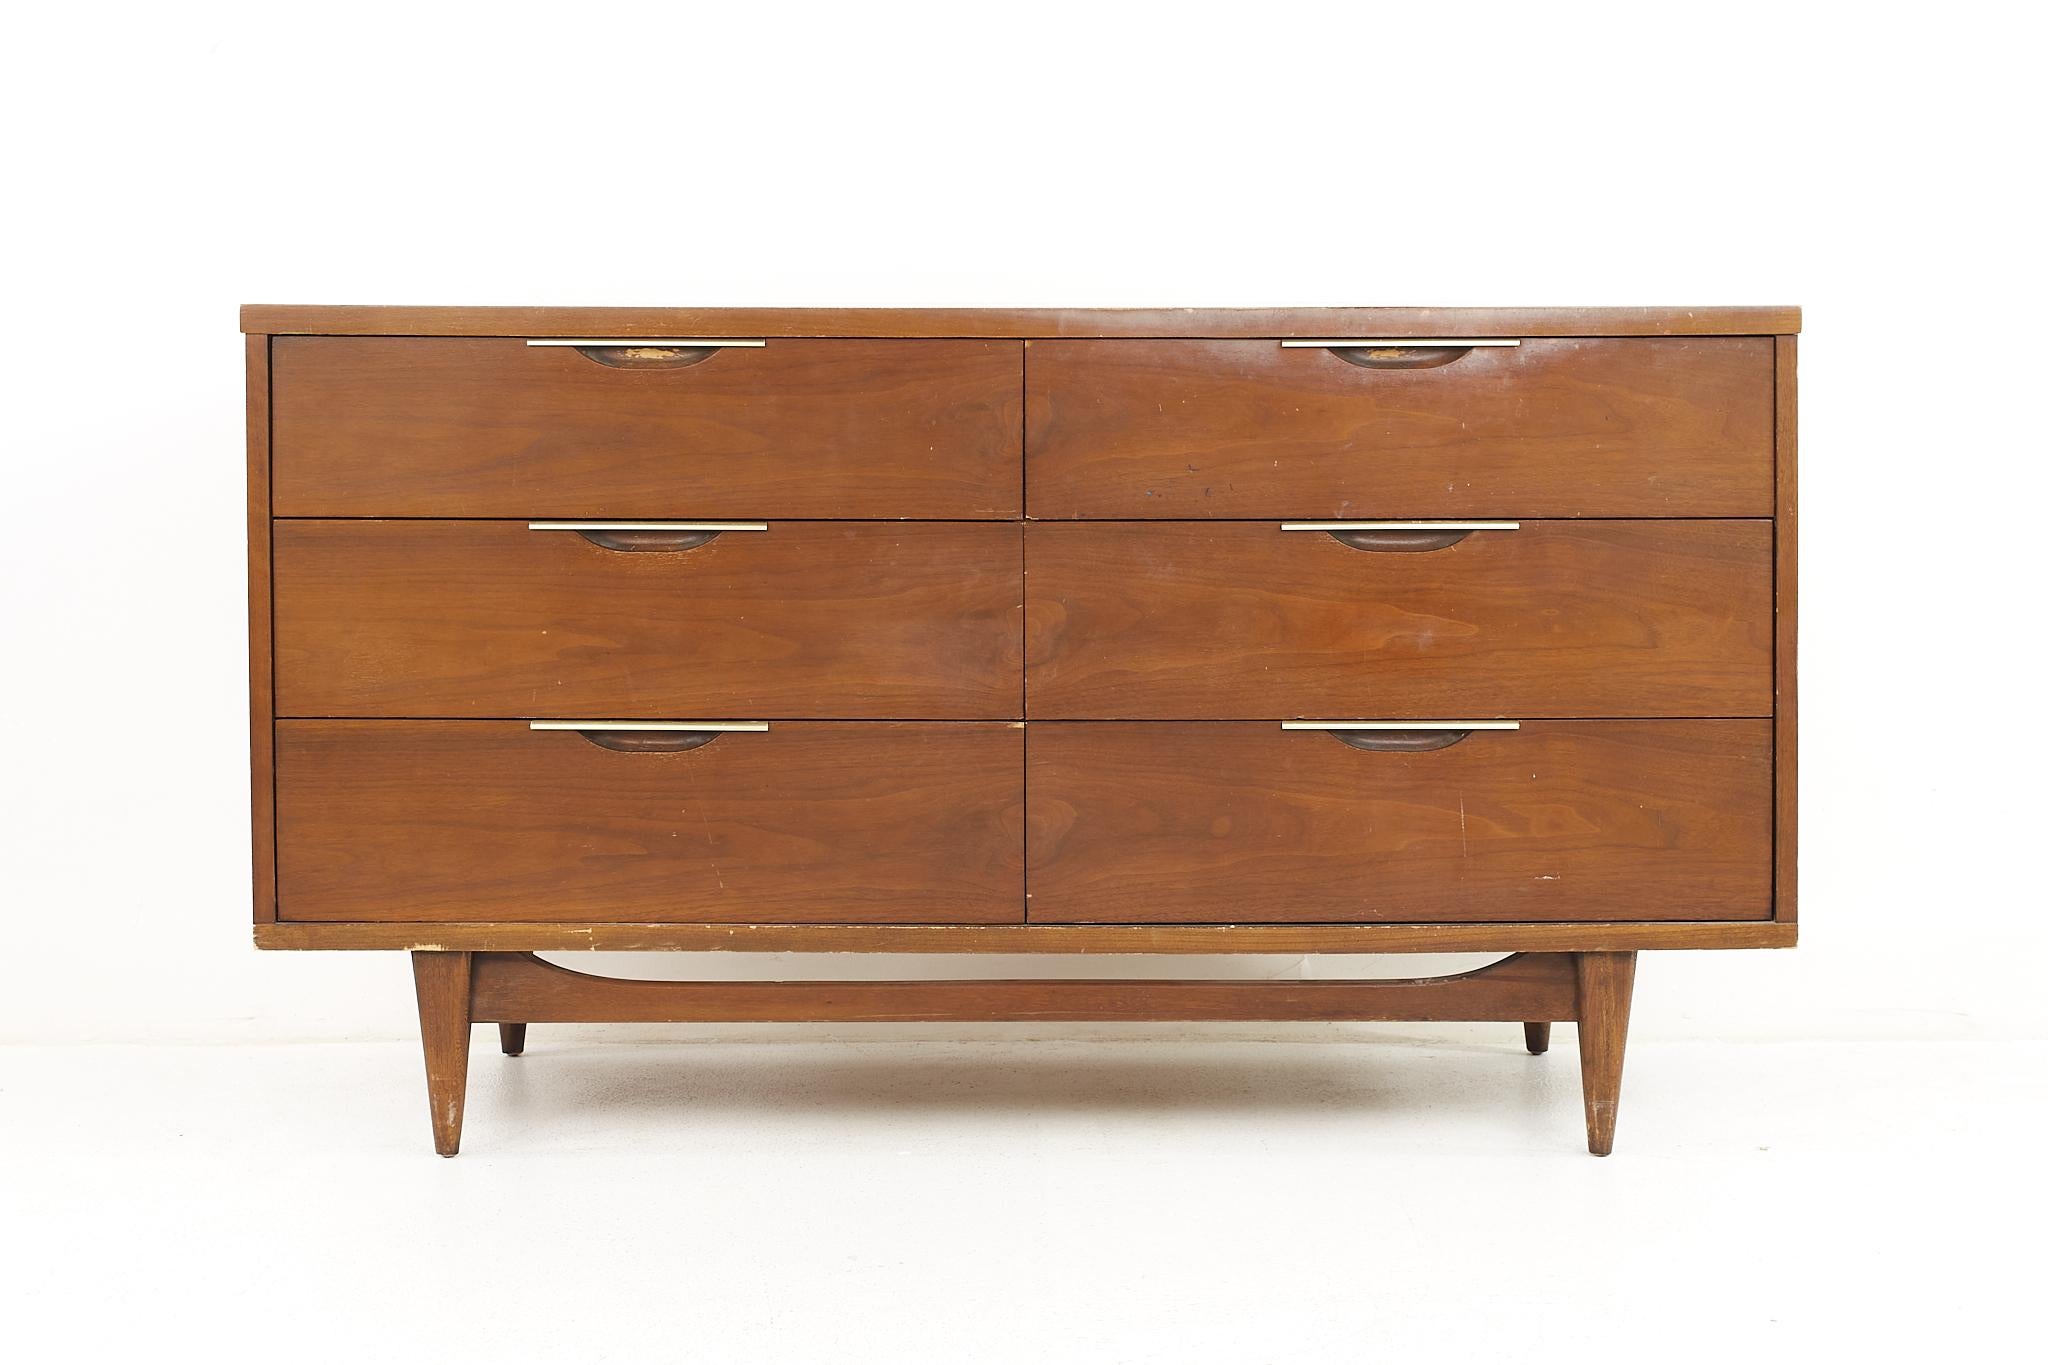 Kent Coffey Tableau mid century walnut and formica top 6 drawer lowboy dresser

The dresser measures: 56 wide x 19 deep x 31.25 inches high

All pieces of furniture can be had in what we call restored vintage condition. That means the piece is